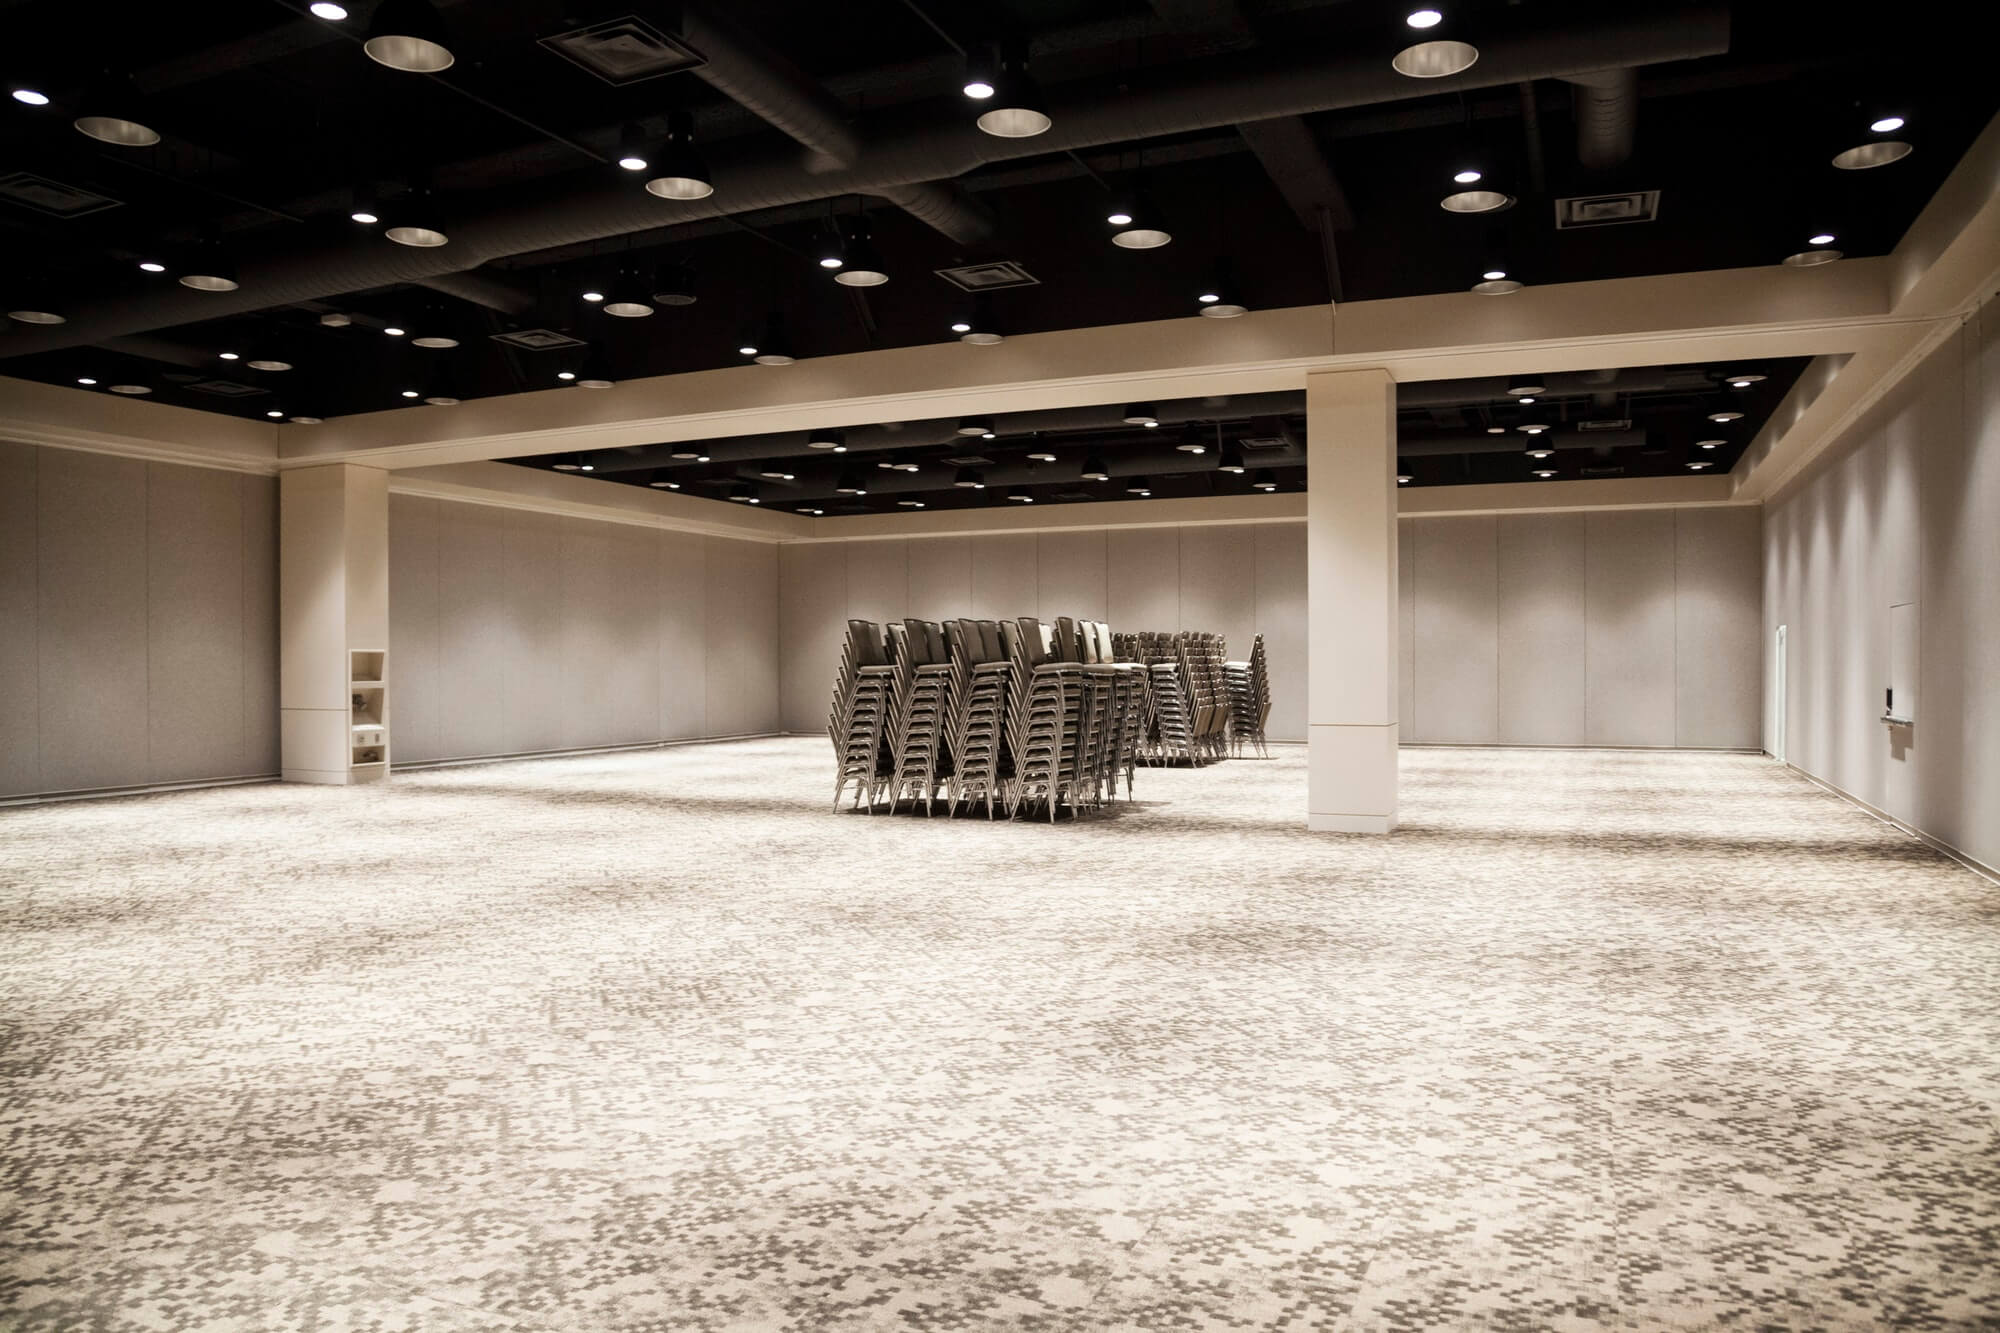 Stacked chairs in an empty convention center meeting room.